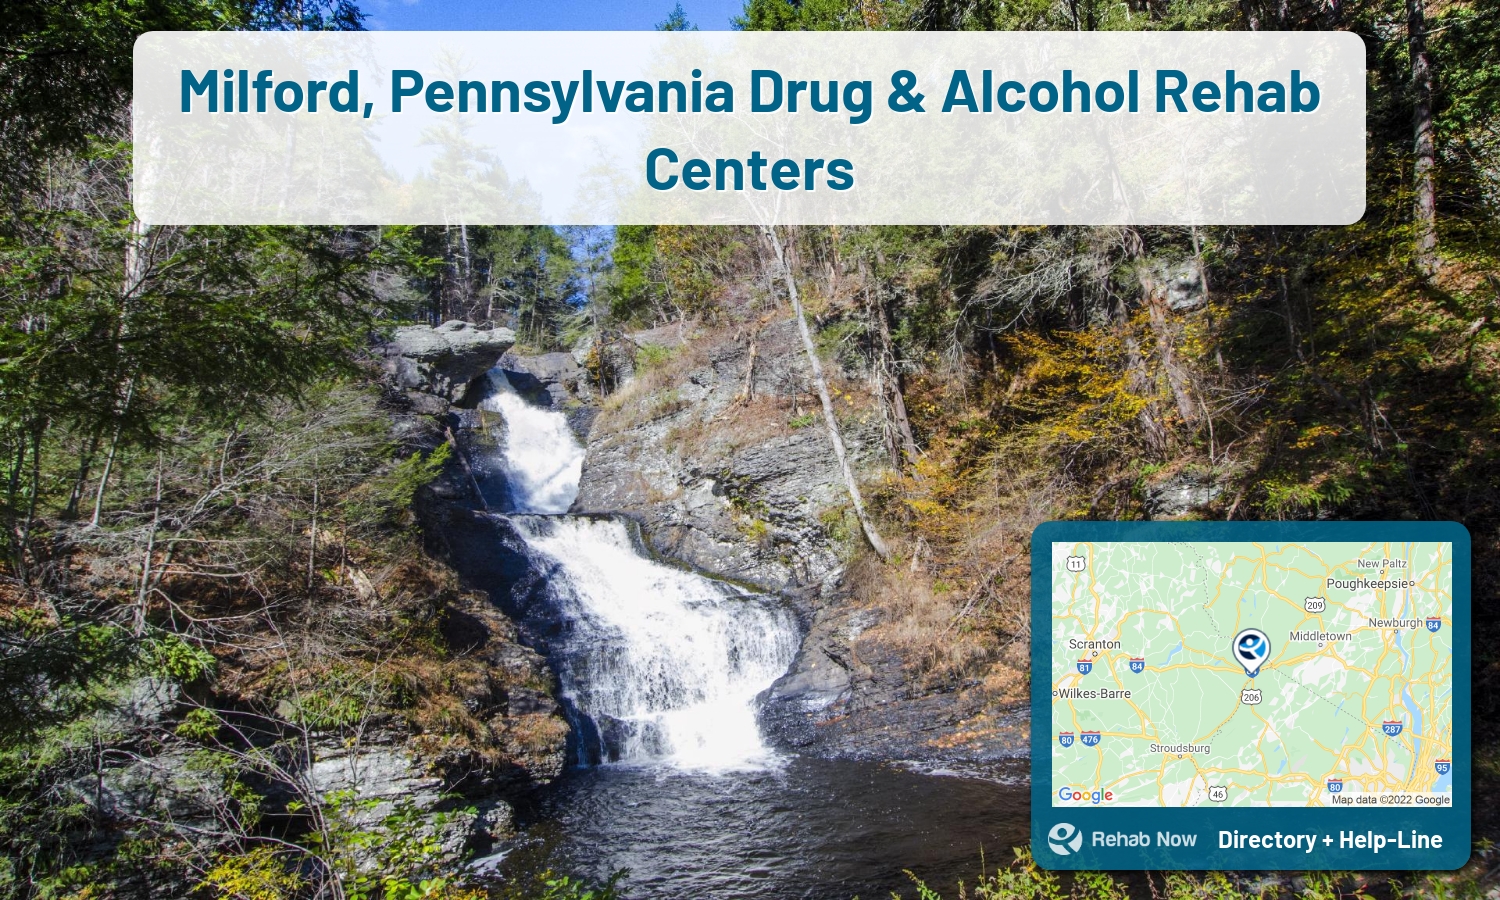 View options, availability, treatment methods, and more, for drug rehab and alcohol treatment in Milford, Pennsylvania